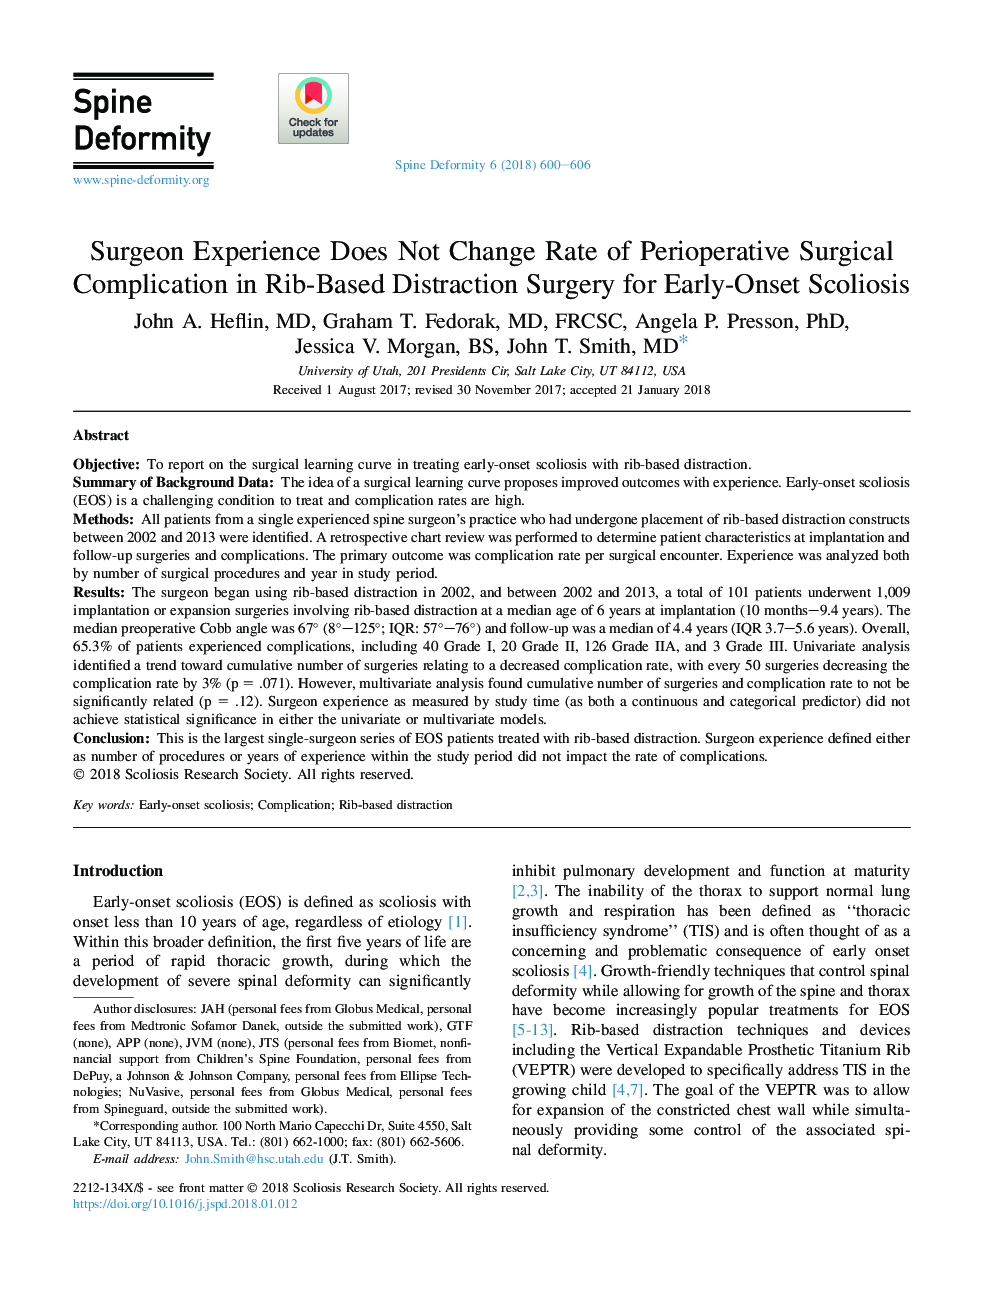 Surgeon Experience Does Not Change Rate of Perioperative Surgical Complication in Rib-Based Distraction Surgery for Early-Onset Scoliosis